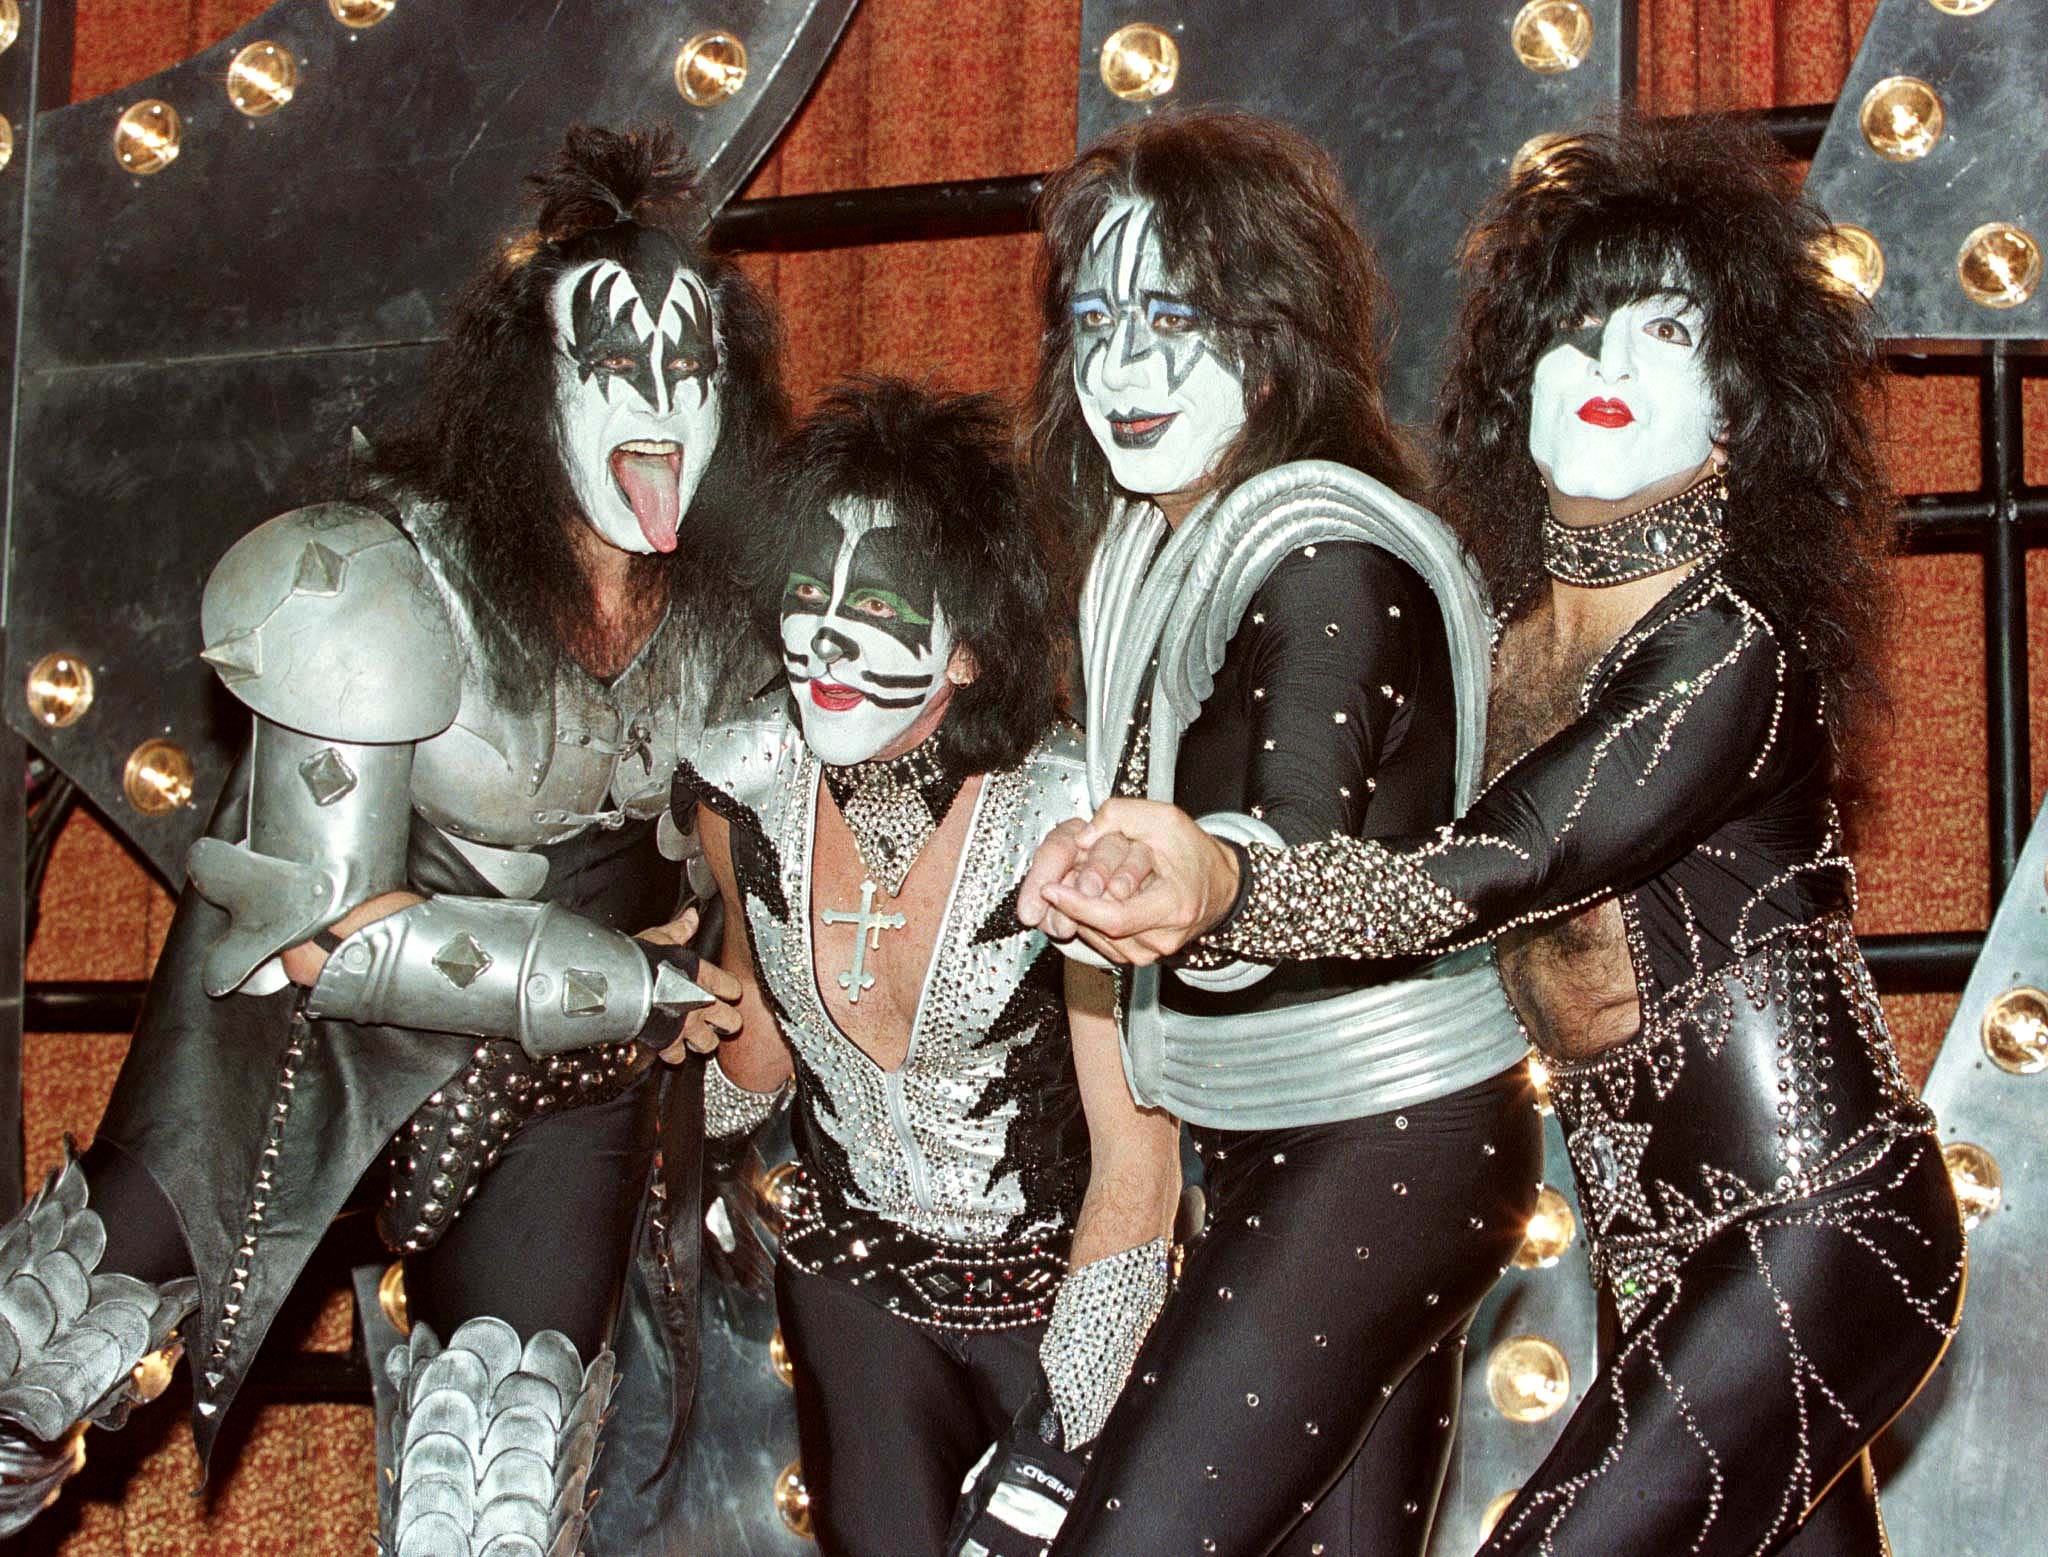 KISS' Gene Simmons on first meeting AC/DC's Angus Young: 